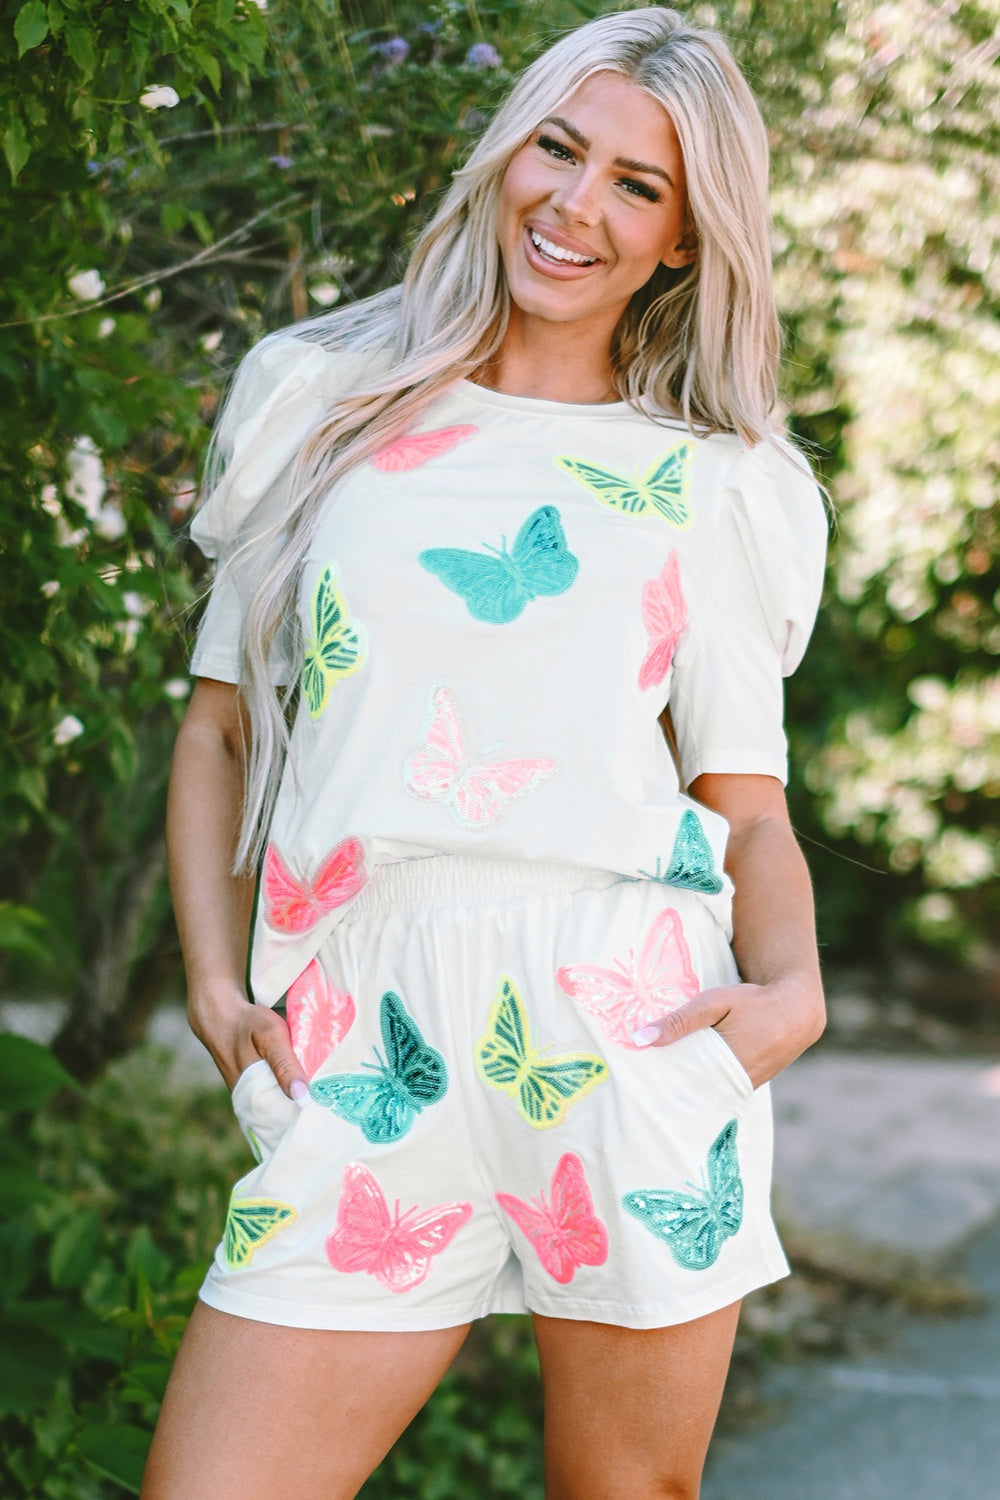 Butterfly Round Neck Top and Shorts Set